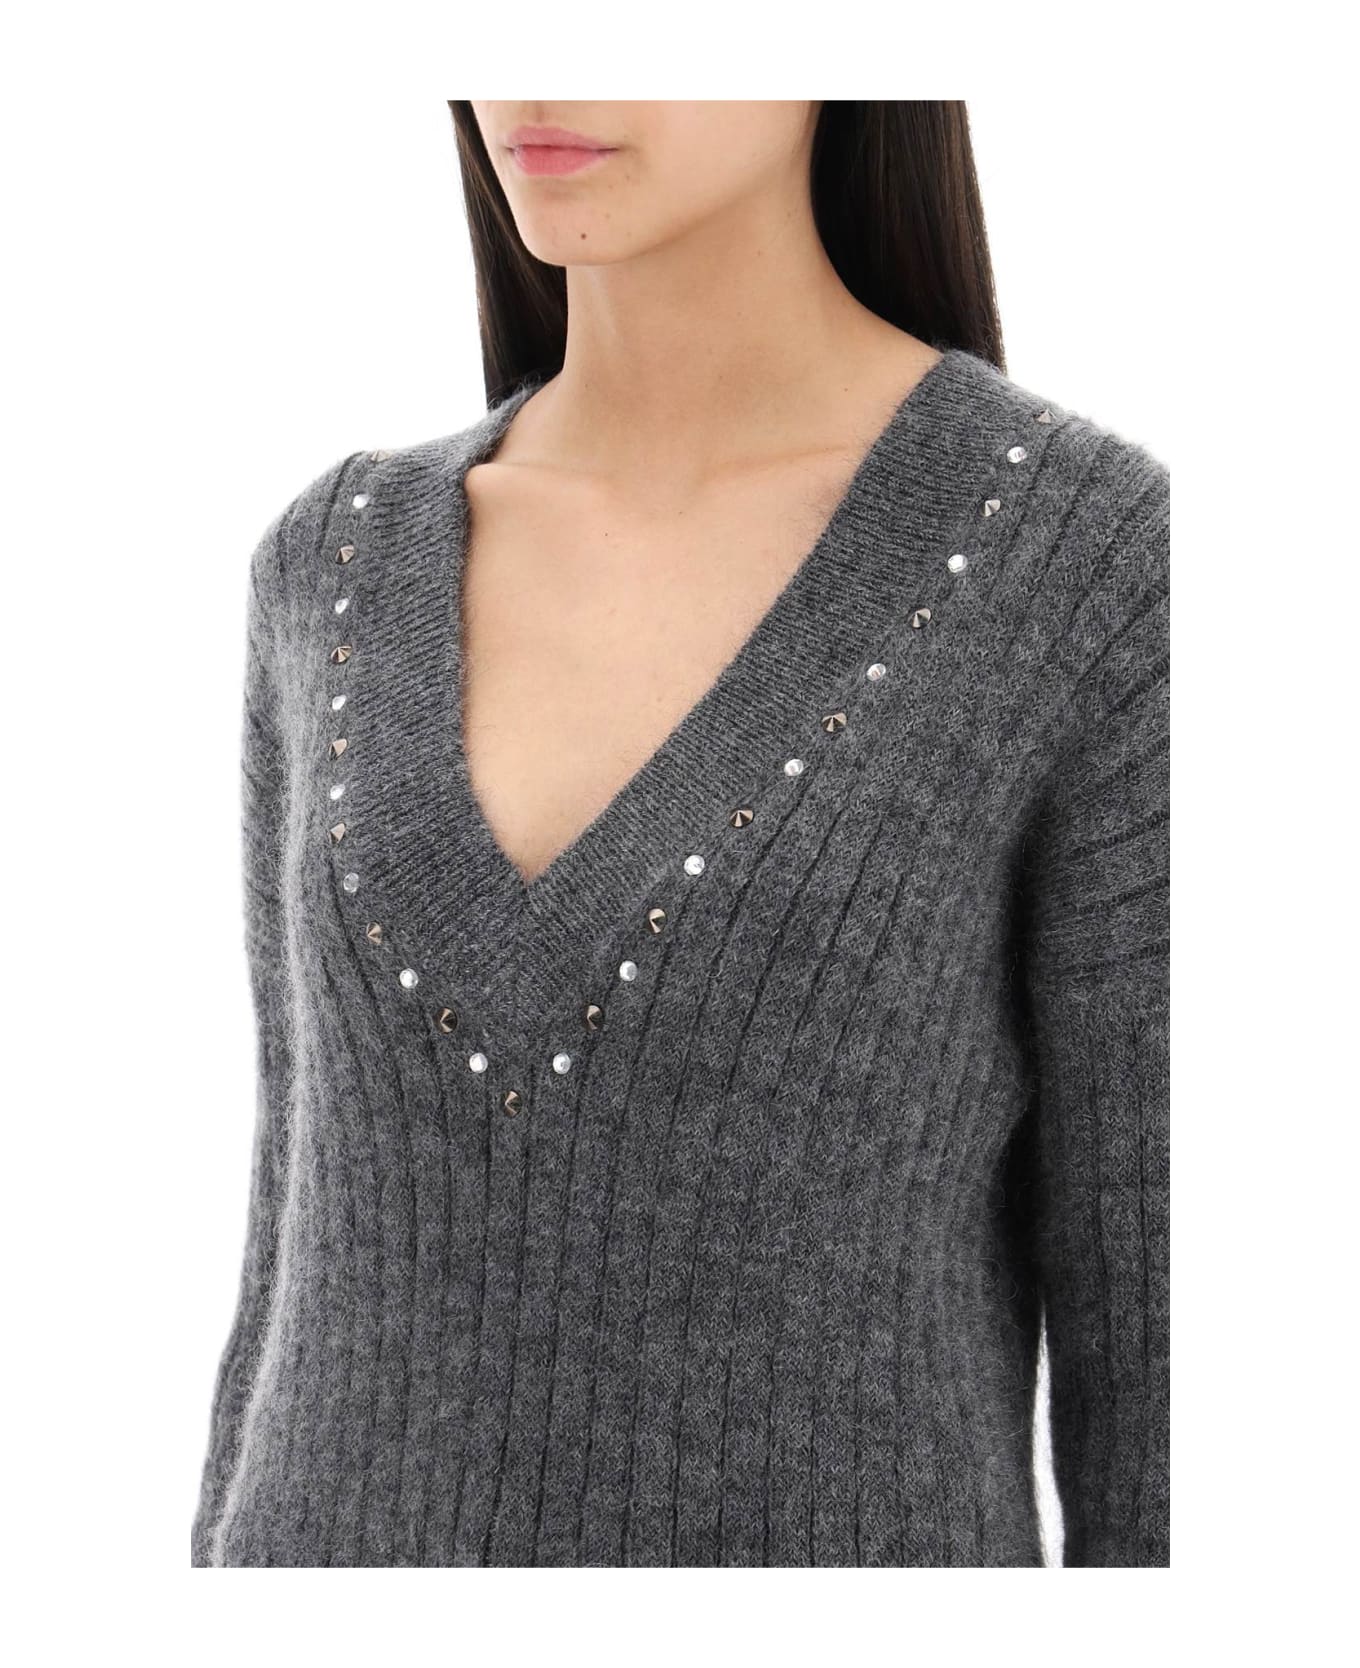 Alessandra Rich Wool Knit Sweater With Studs And Crystals - GREY MELANGE (Grey)